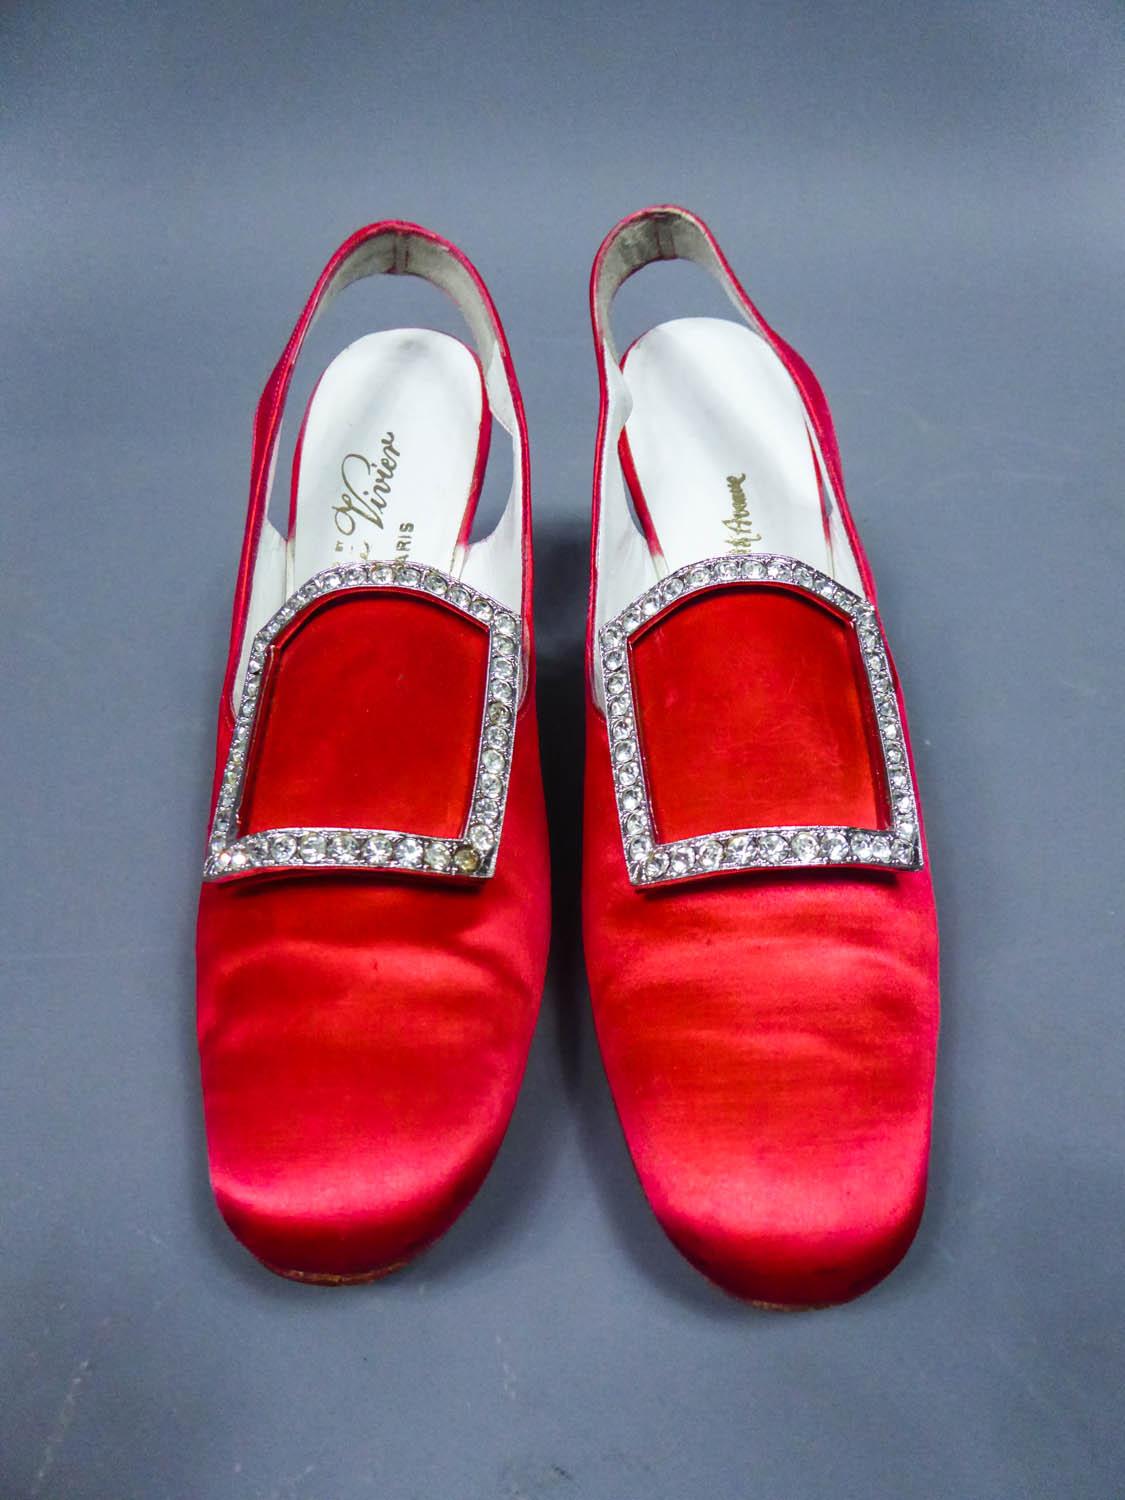 Circa 1970
France for the American market

Iconique Pair of Roger Vivier pumps for the American luxury market from the 70s. Fully covered with vermilion red silk satin and lined with white leather. Rounded ends decorated with a silver buckle covered